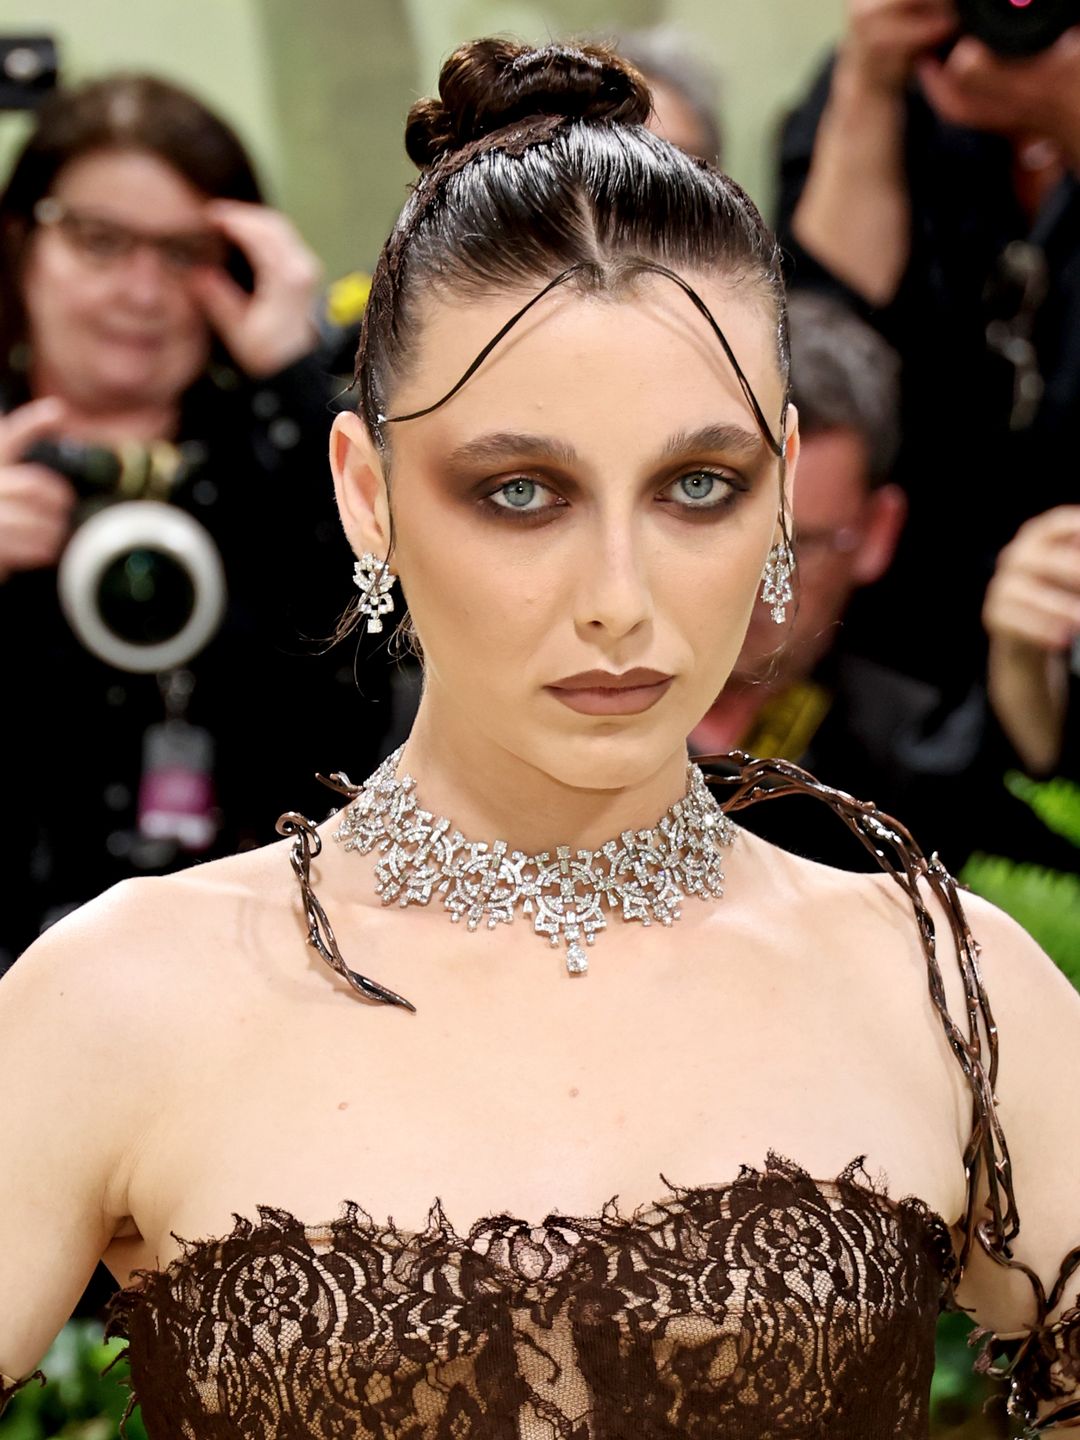 Emma Chamberlain in gothic makeup and a lace dress at the Met Gala